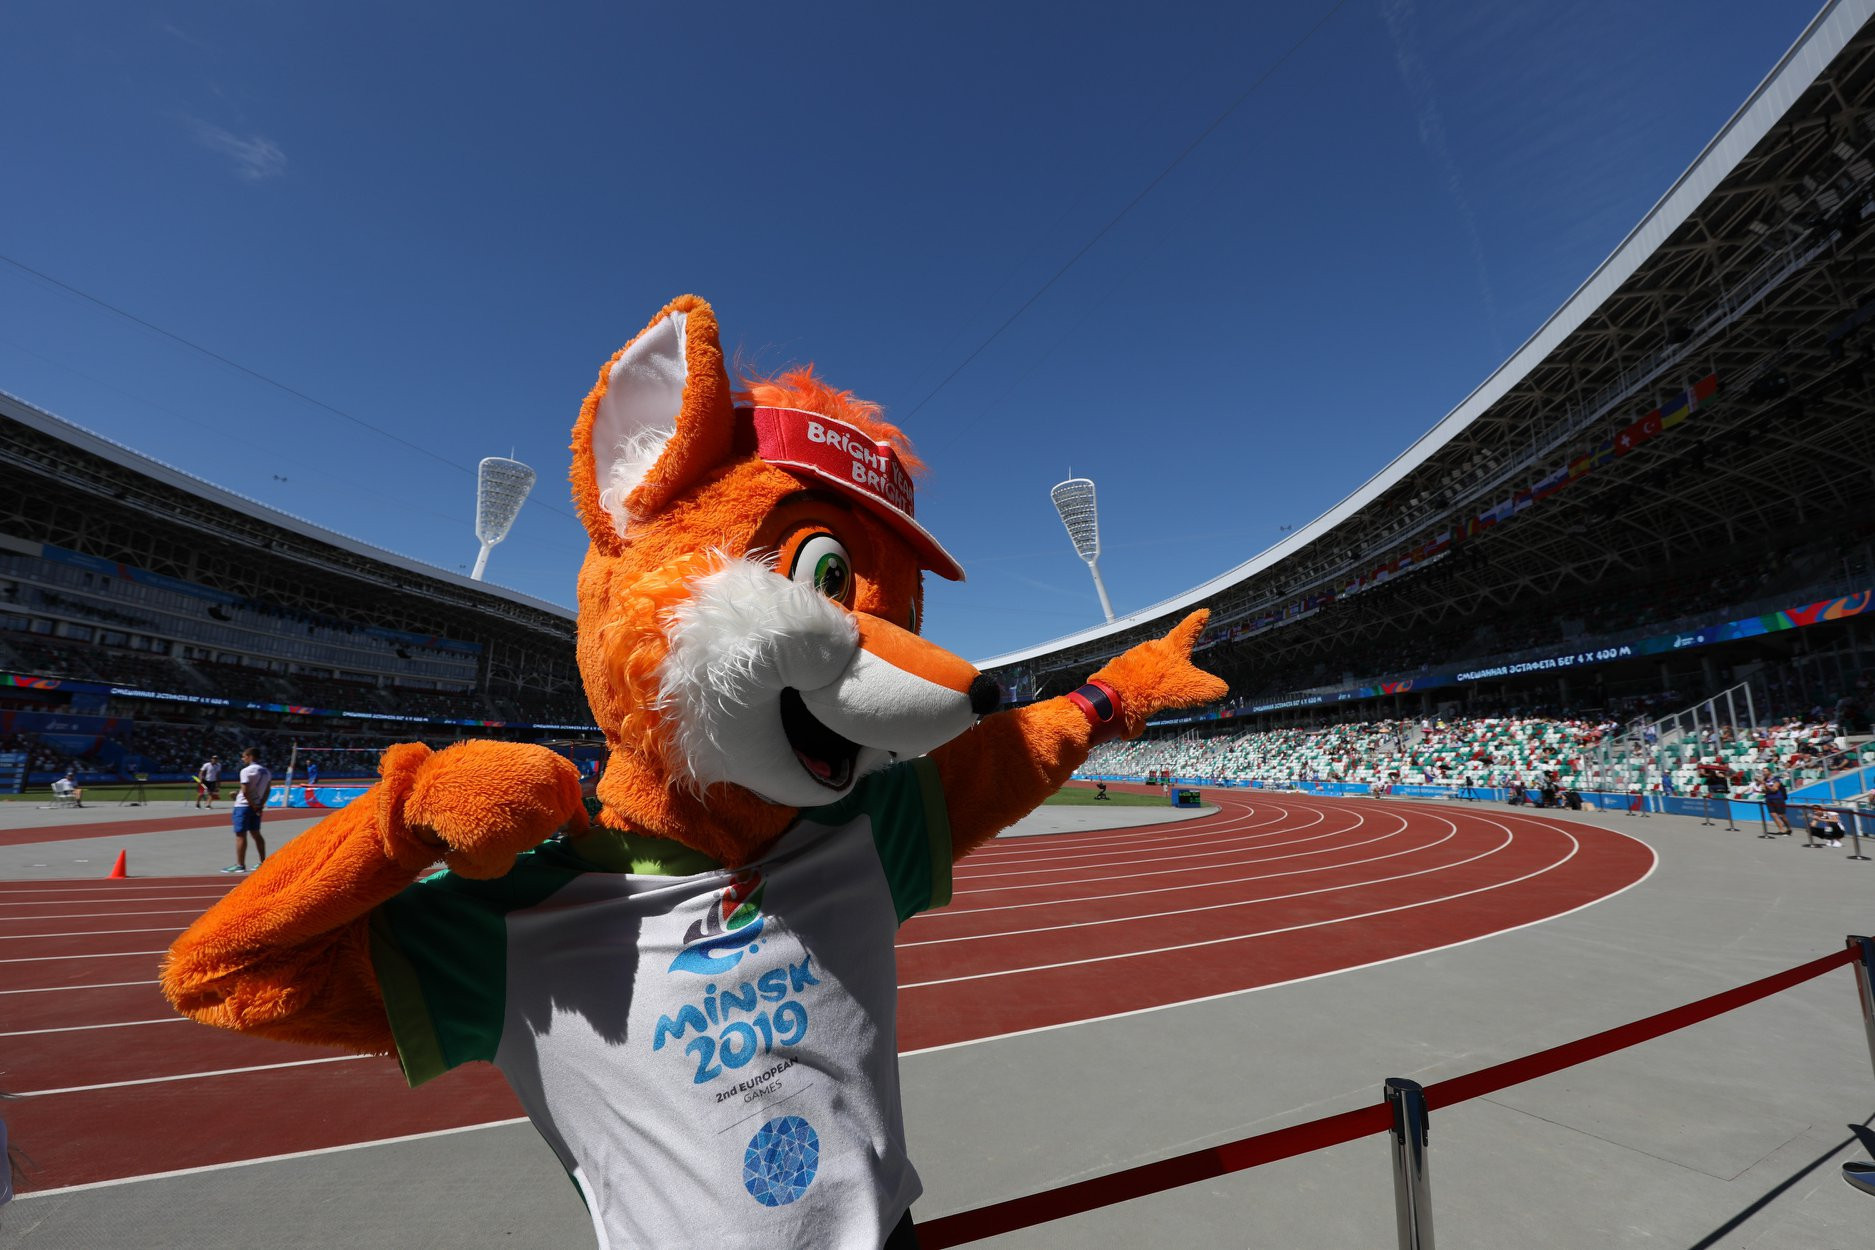 Minsk 2019 mascot Lesik the Fox was on hand to warm up the crowd ©Minsk 2019